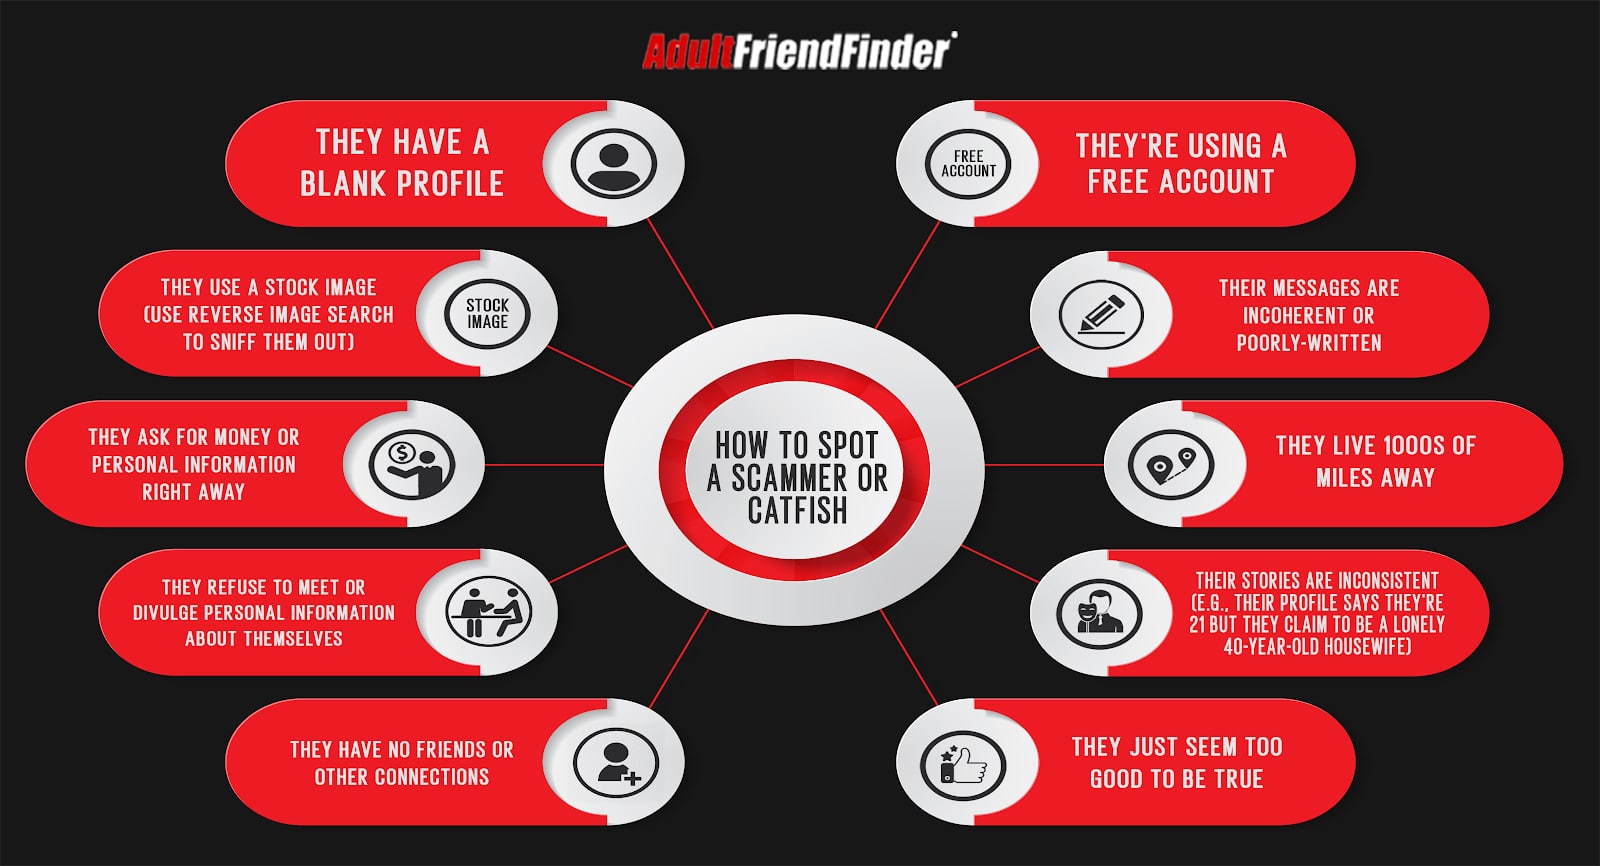 AdultFriendFinder Review — Is AFF Legit or a Waste of Time? I spent 3 months as an AFF member, here is my review - Events photo